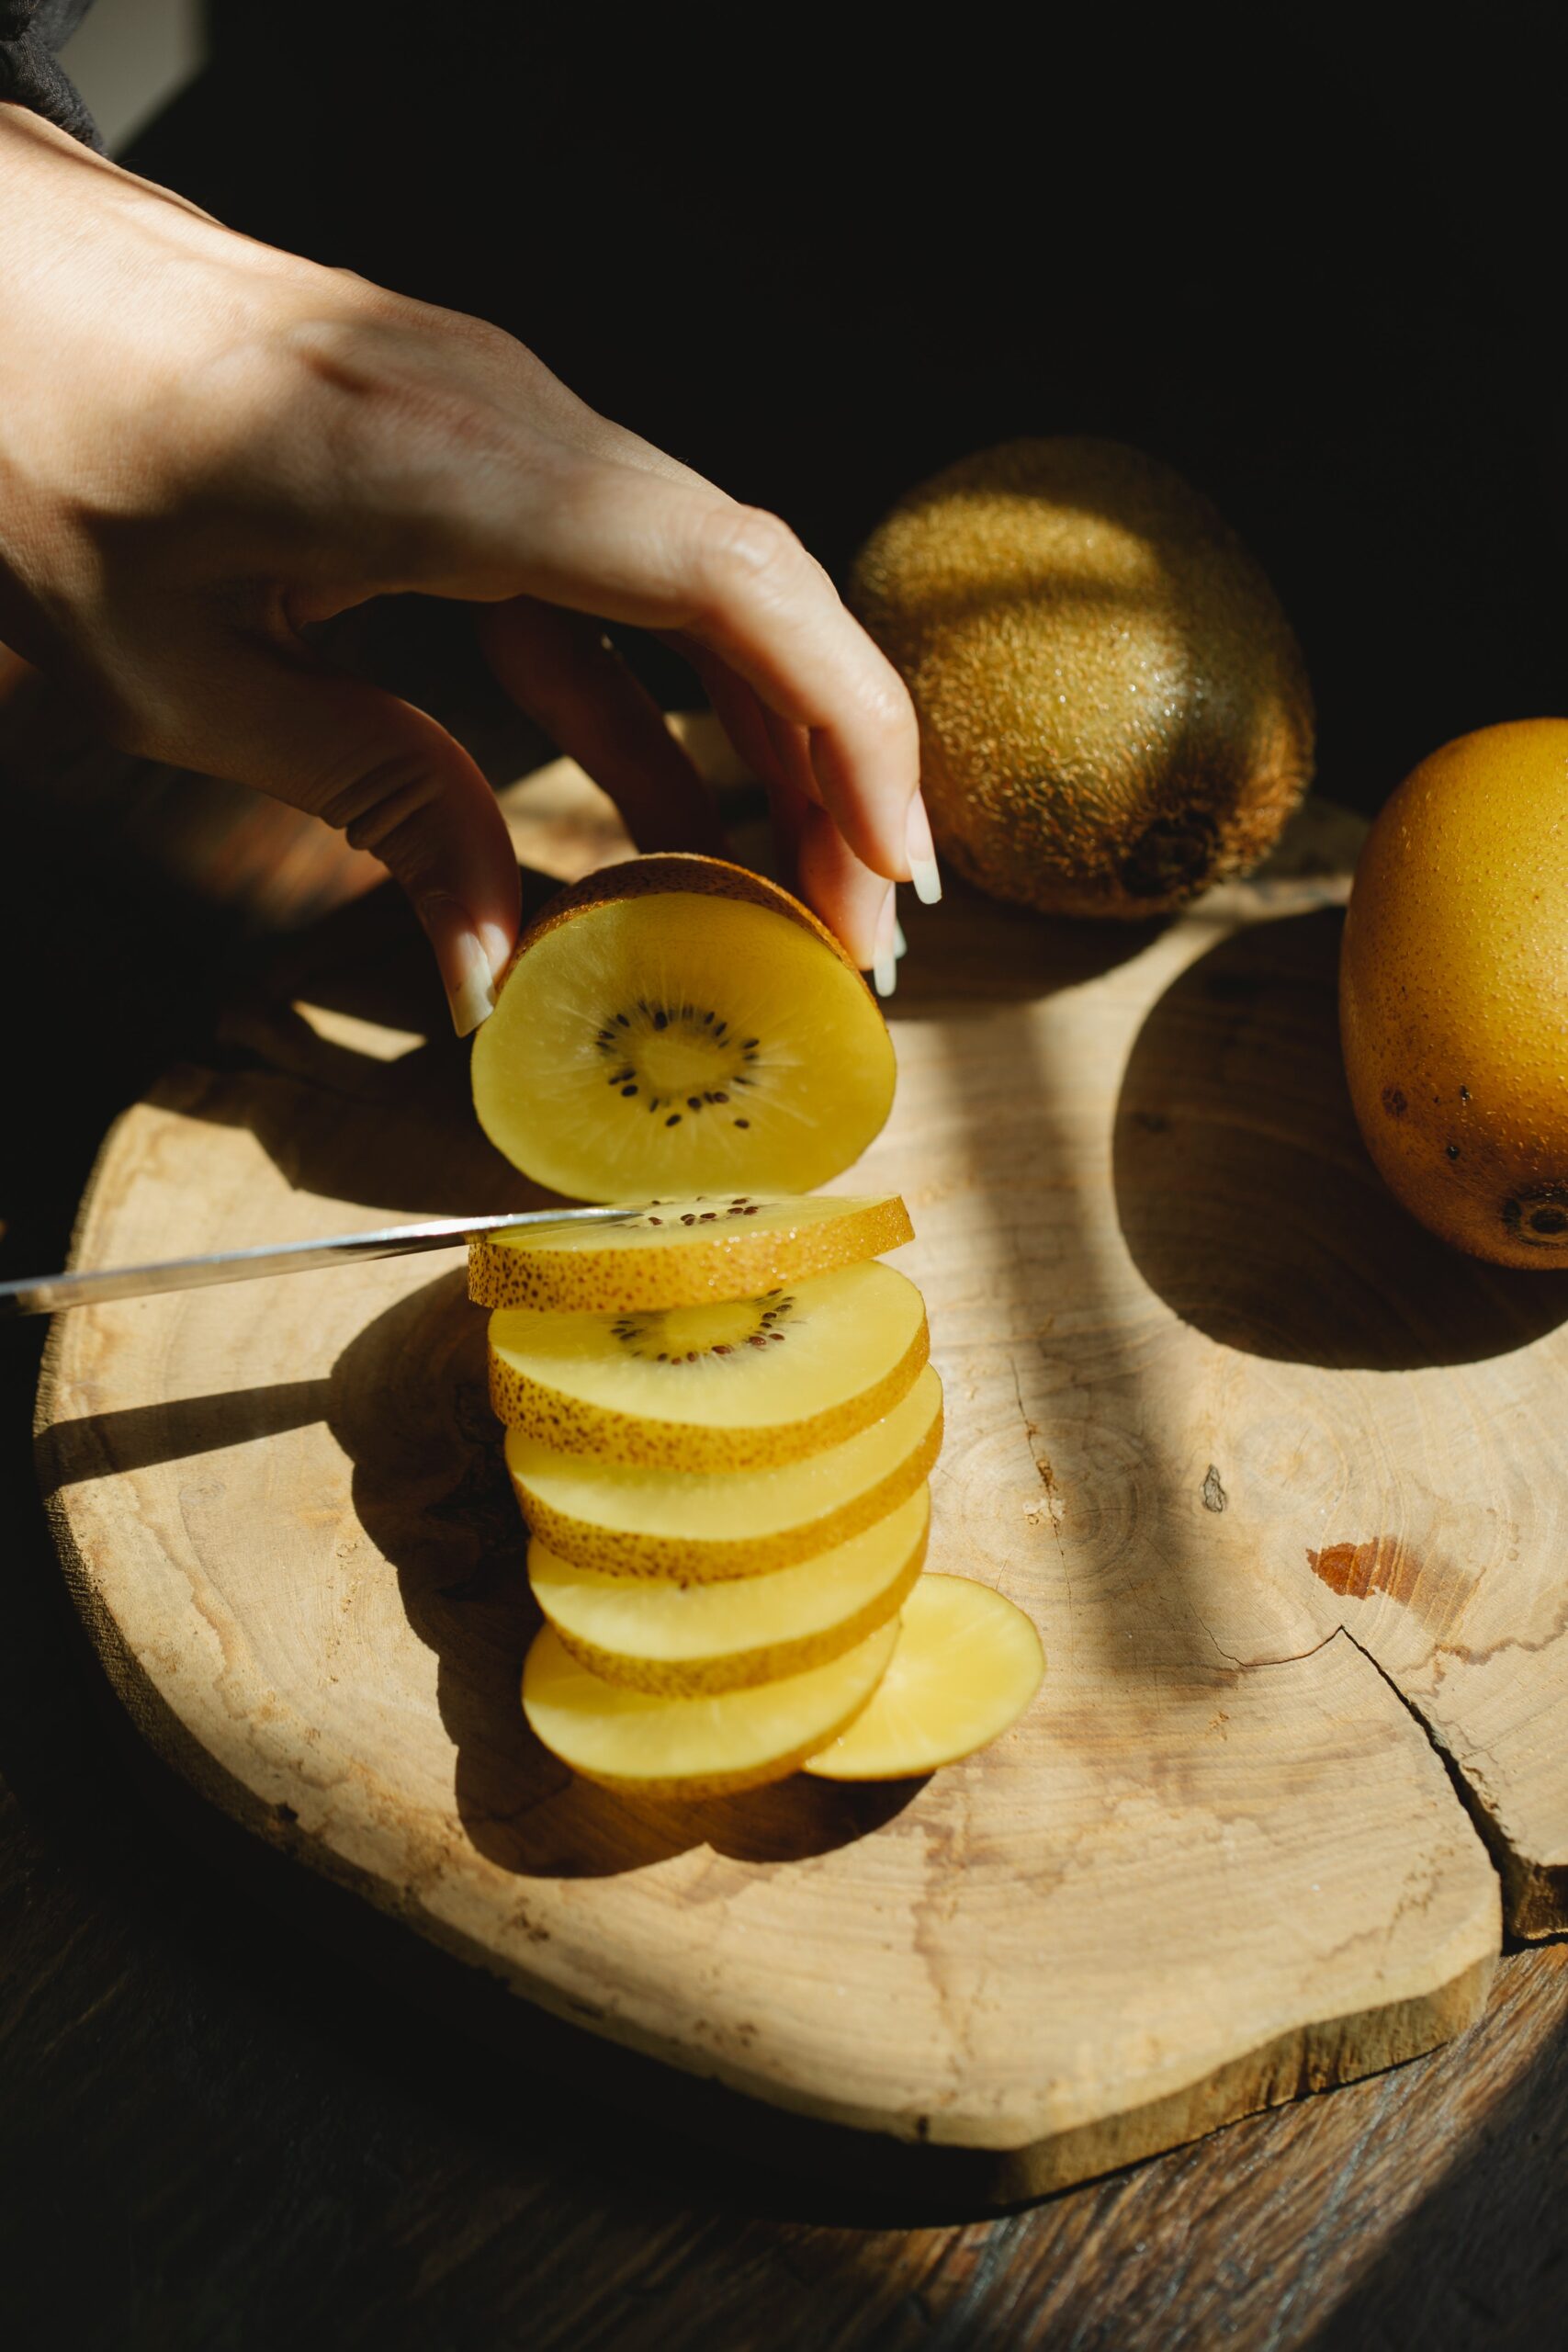 A hand finely slicing a kiwi on a wooden table